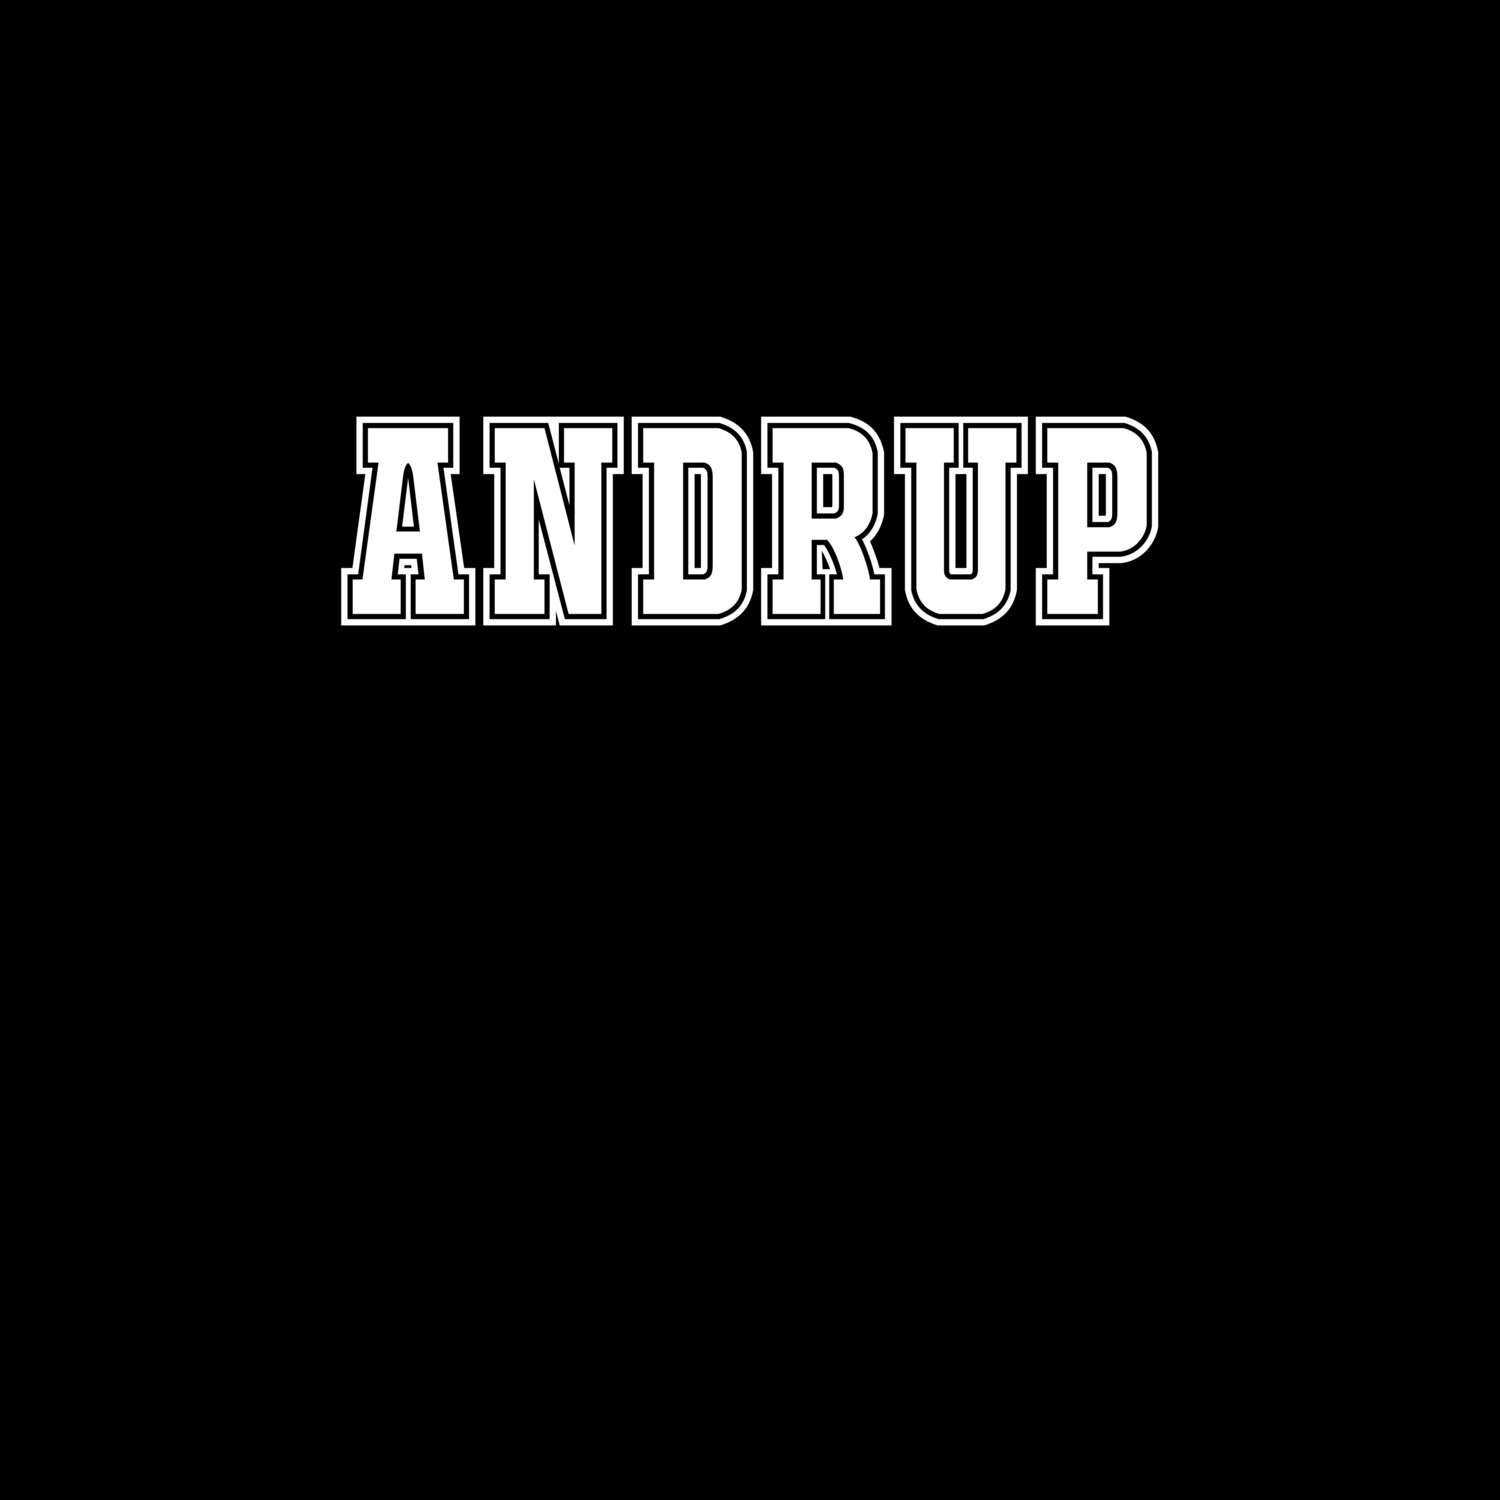 Andrup T-Shirt »Classic«